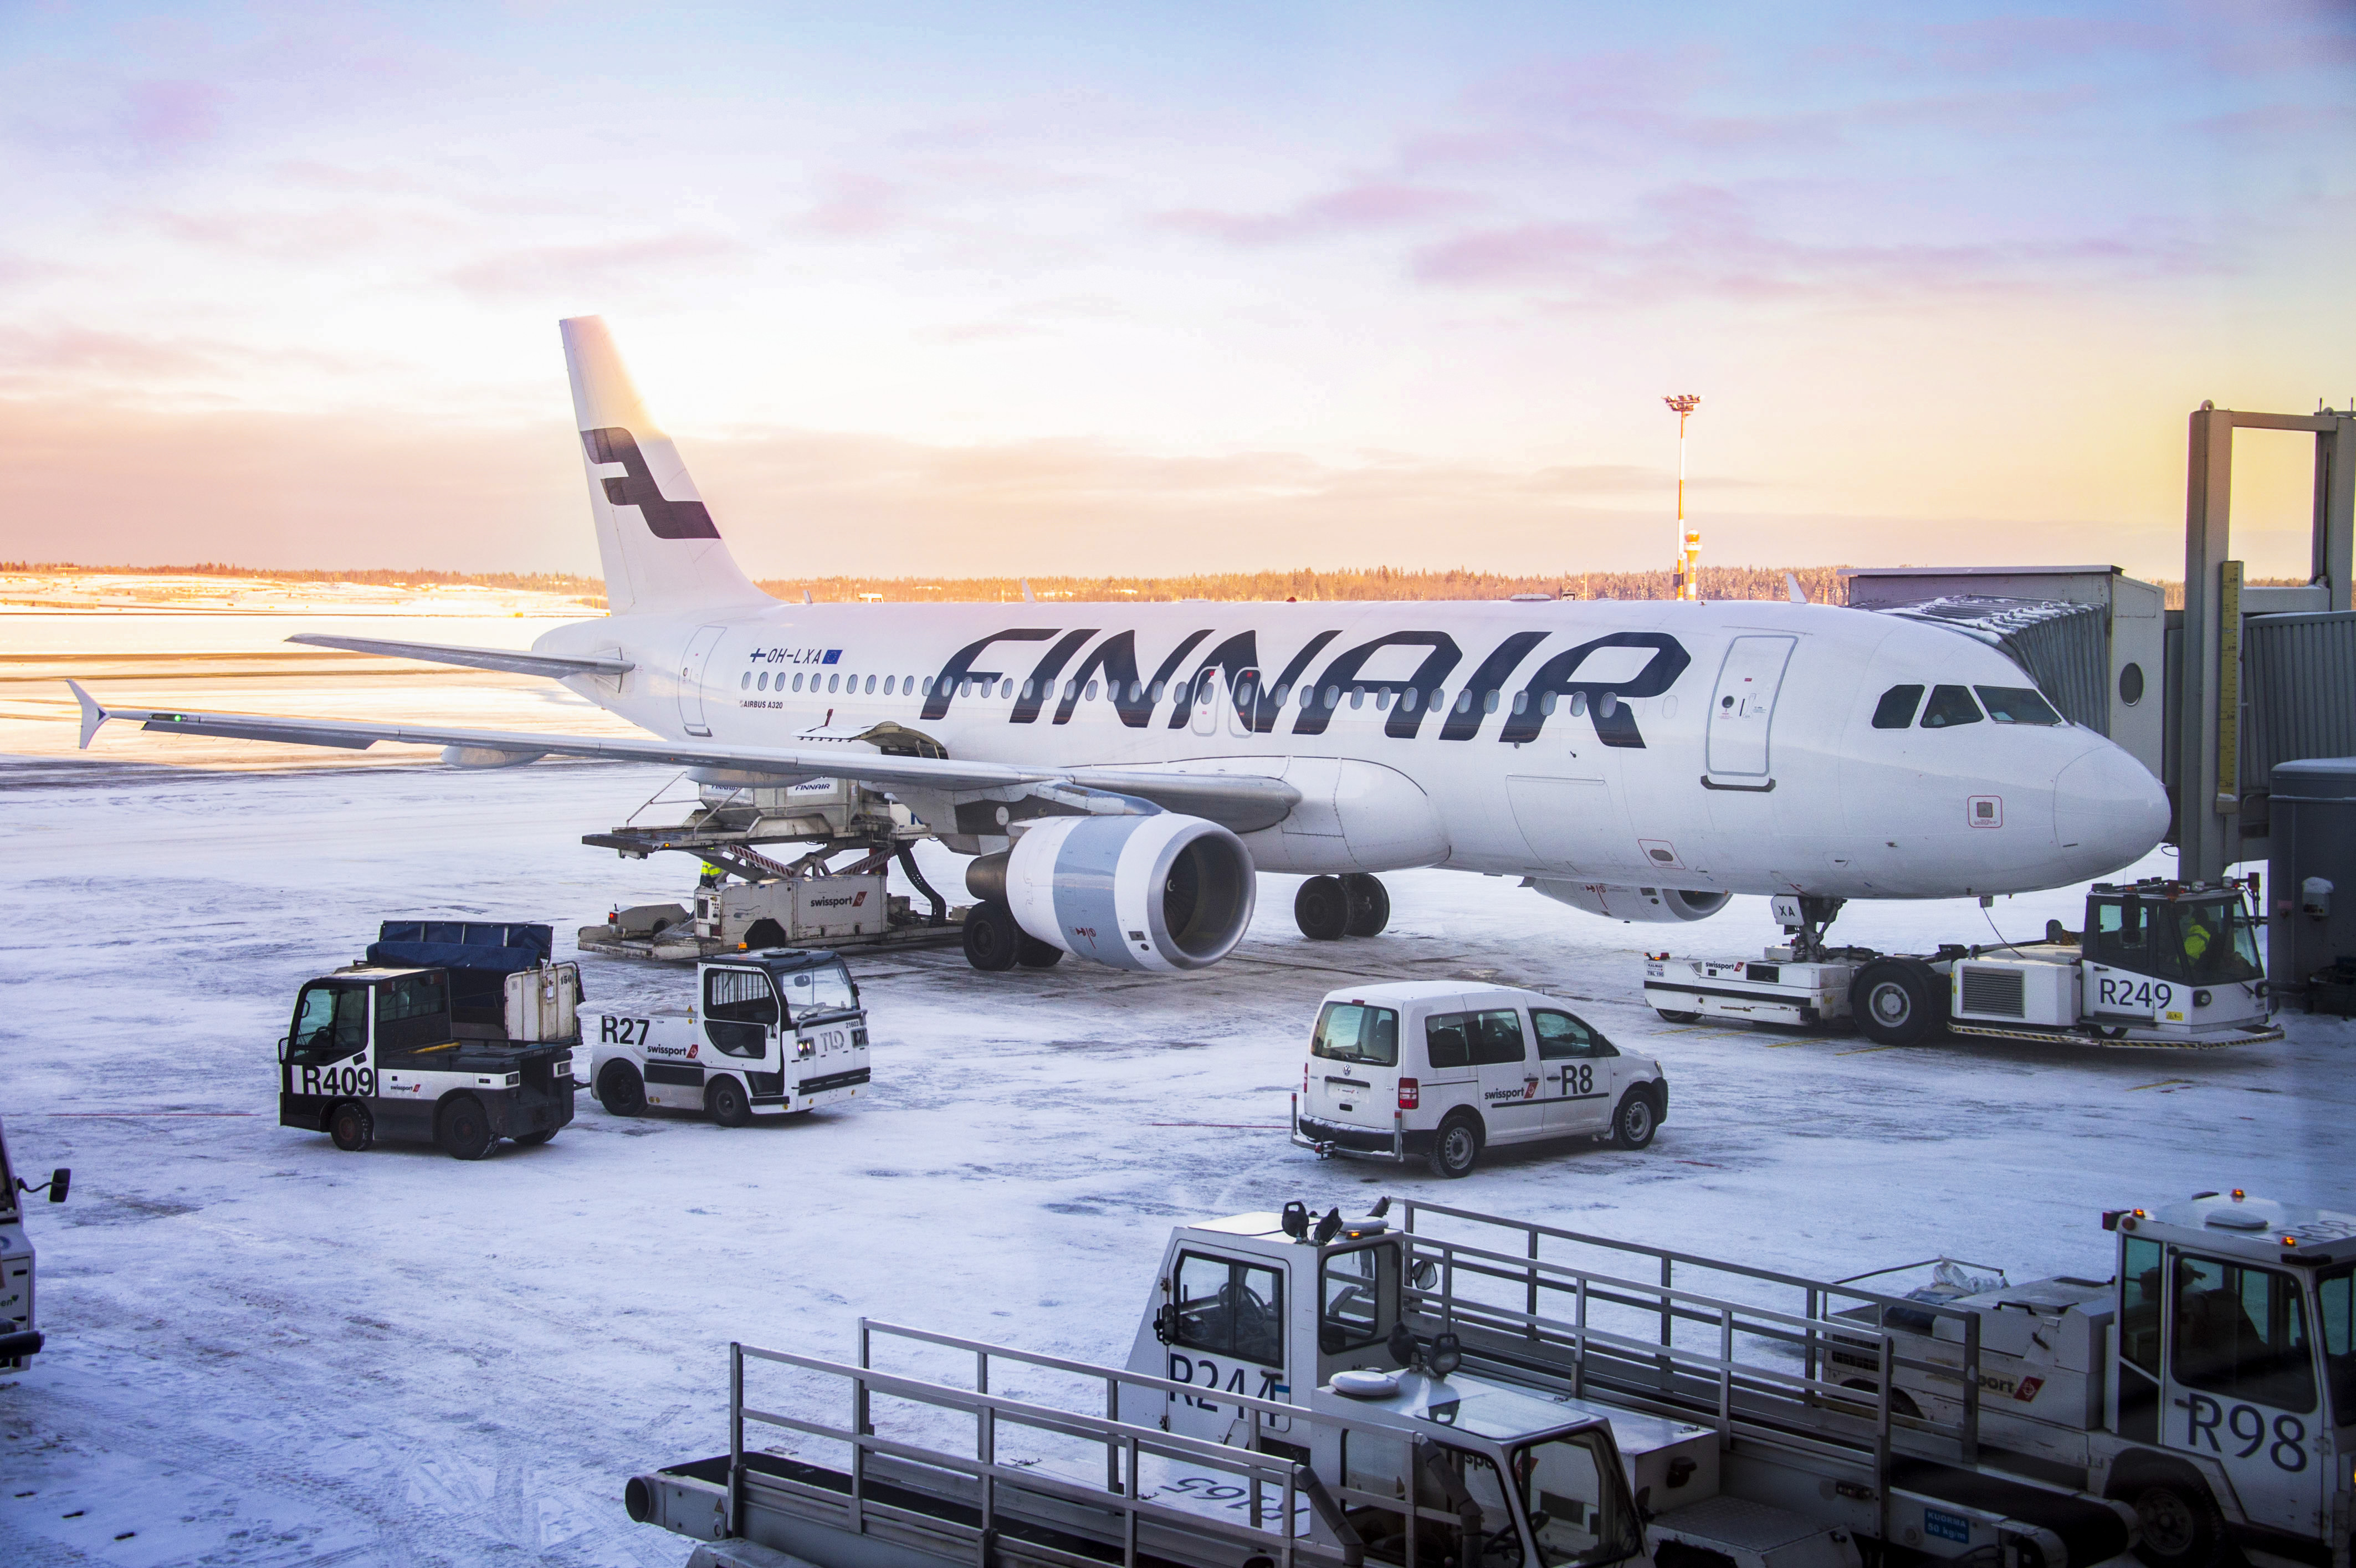 Finnair is starting temporary termination negotiations with its personnel